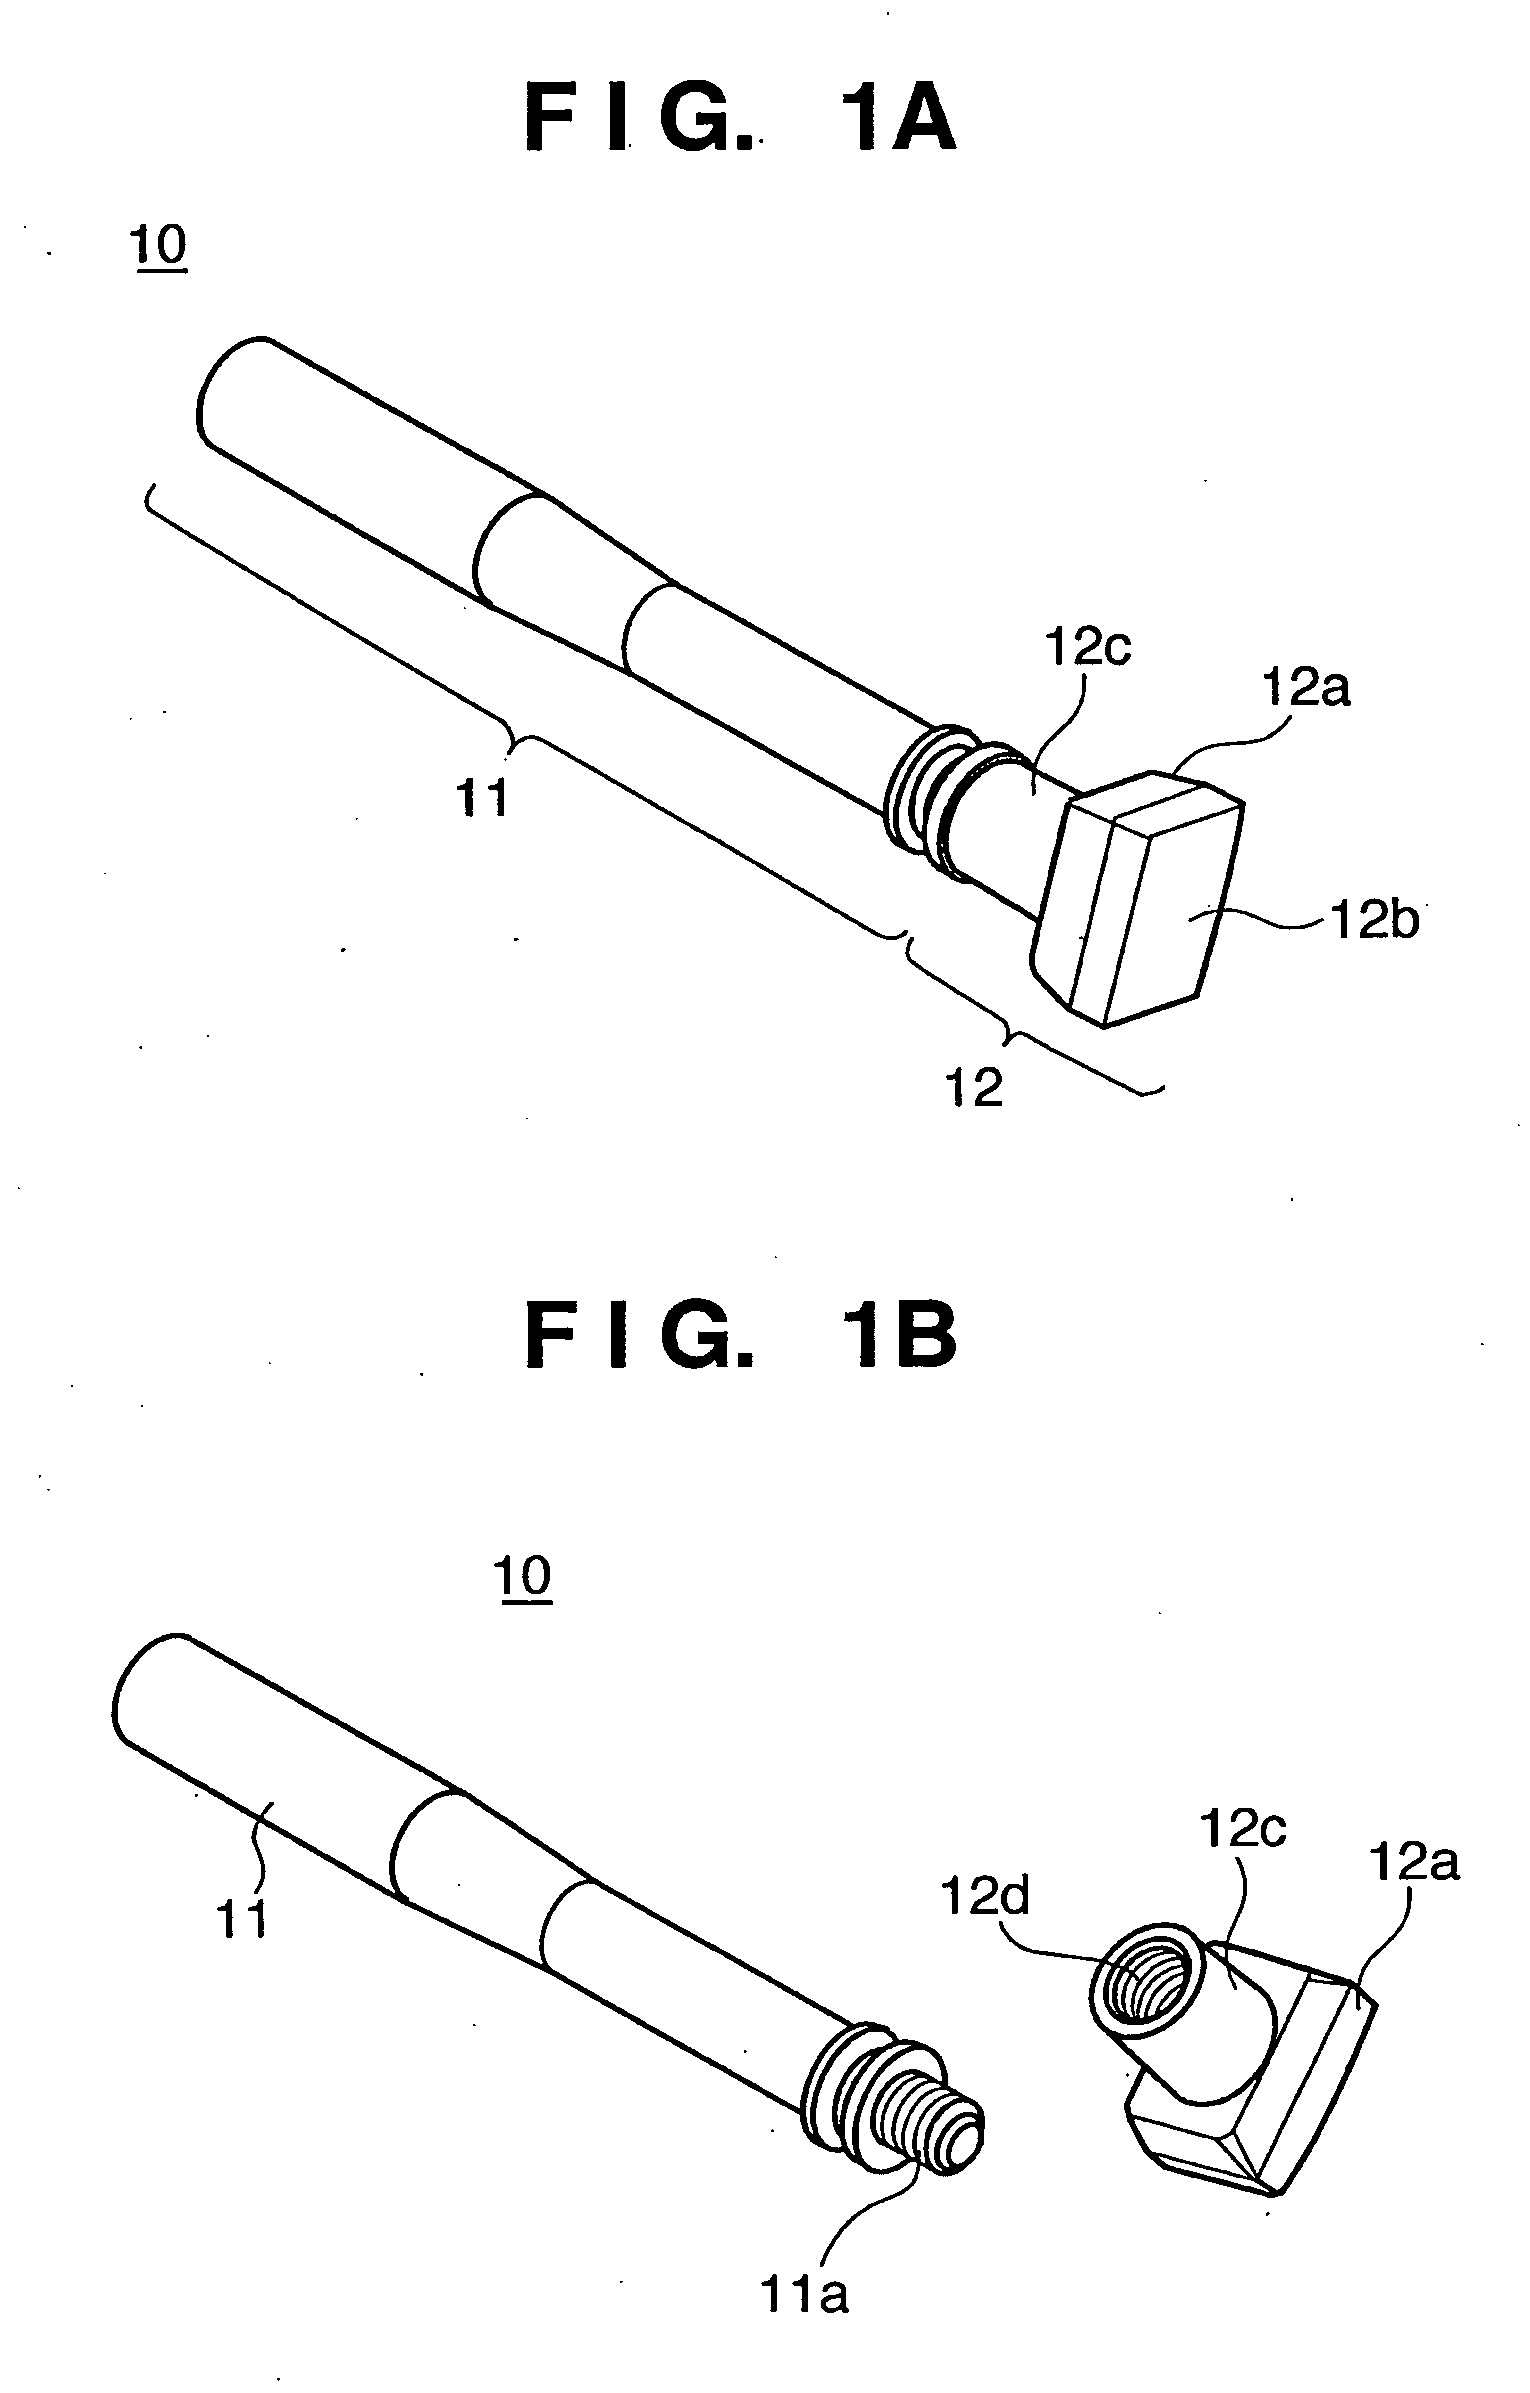 Cleaning device